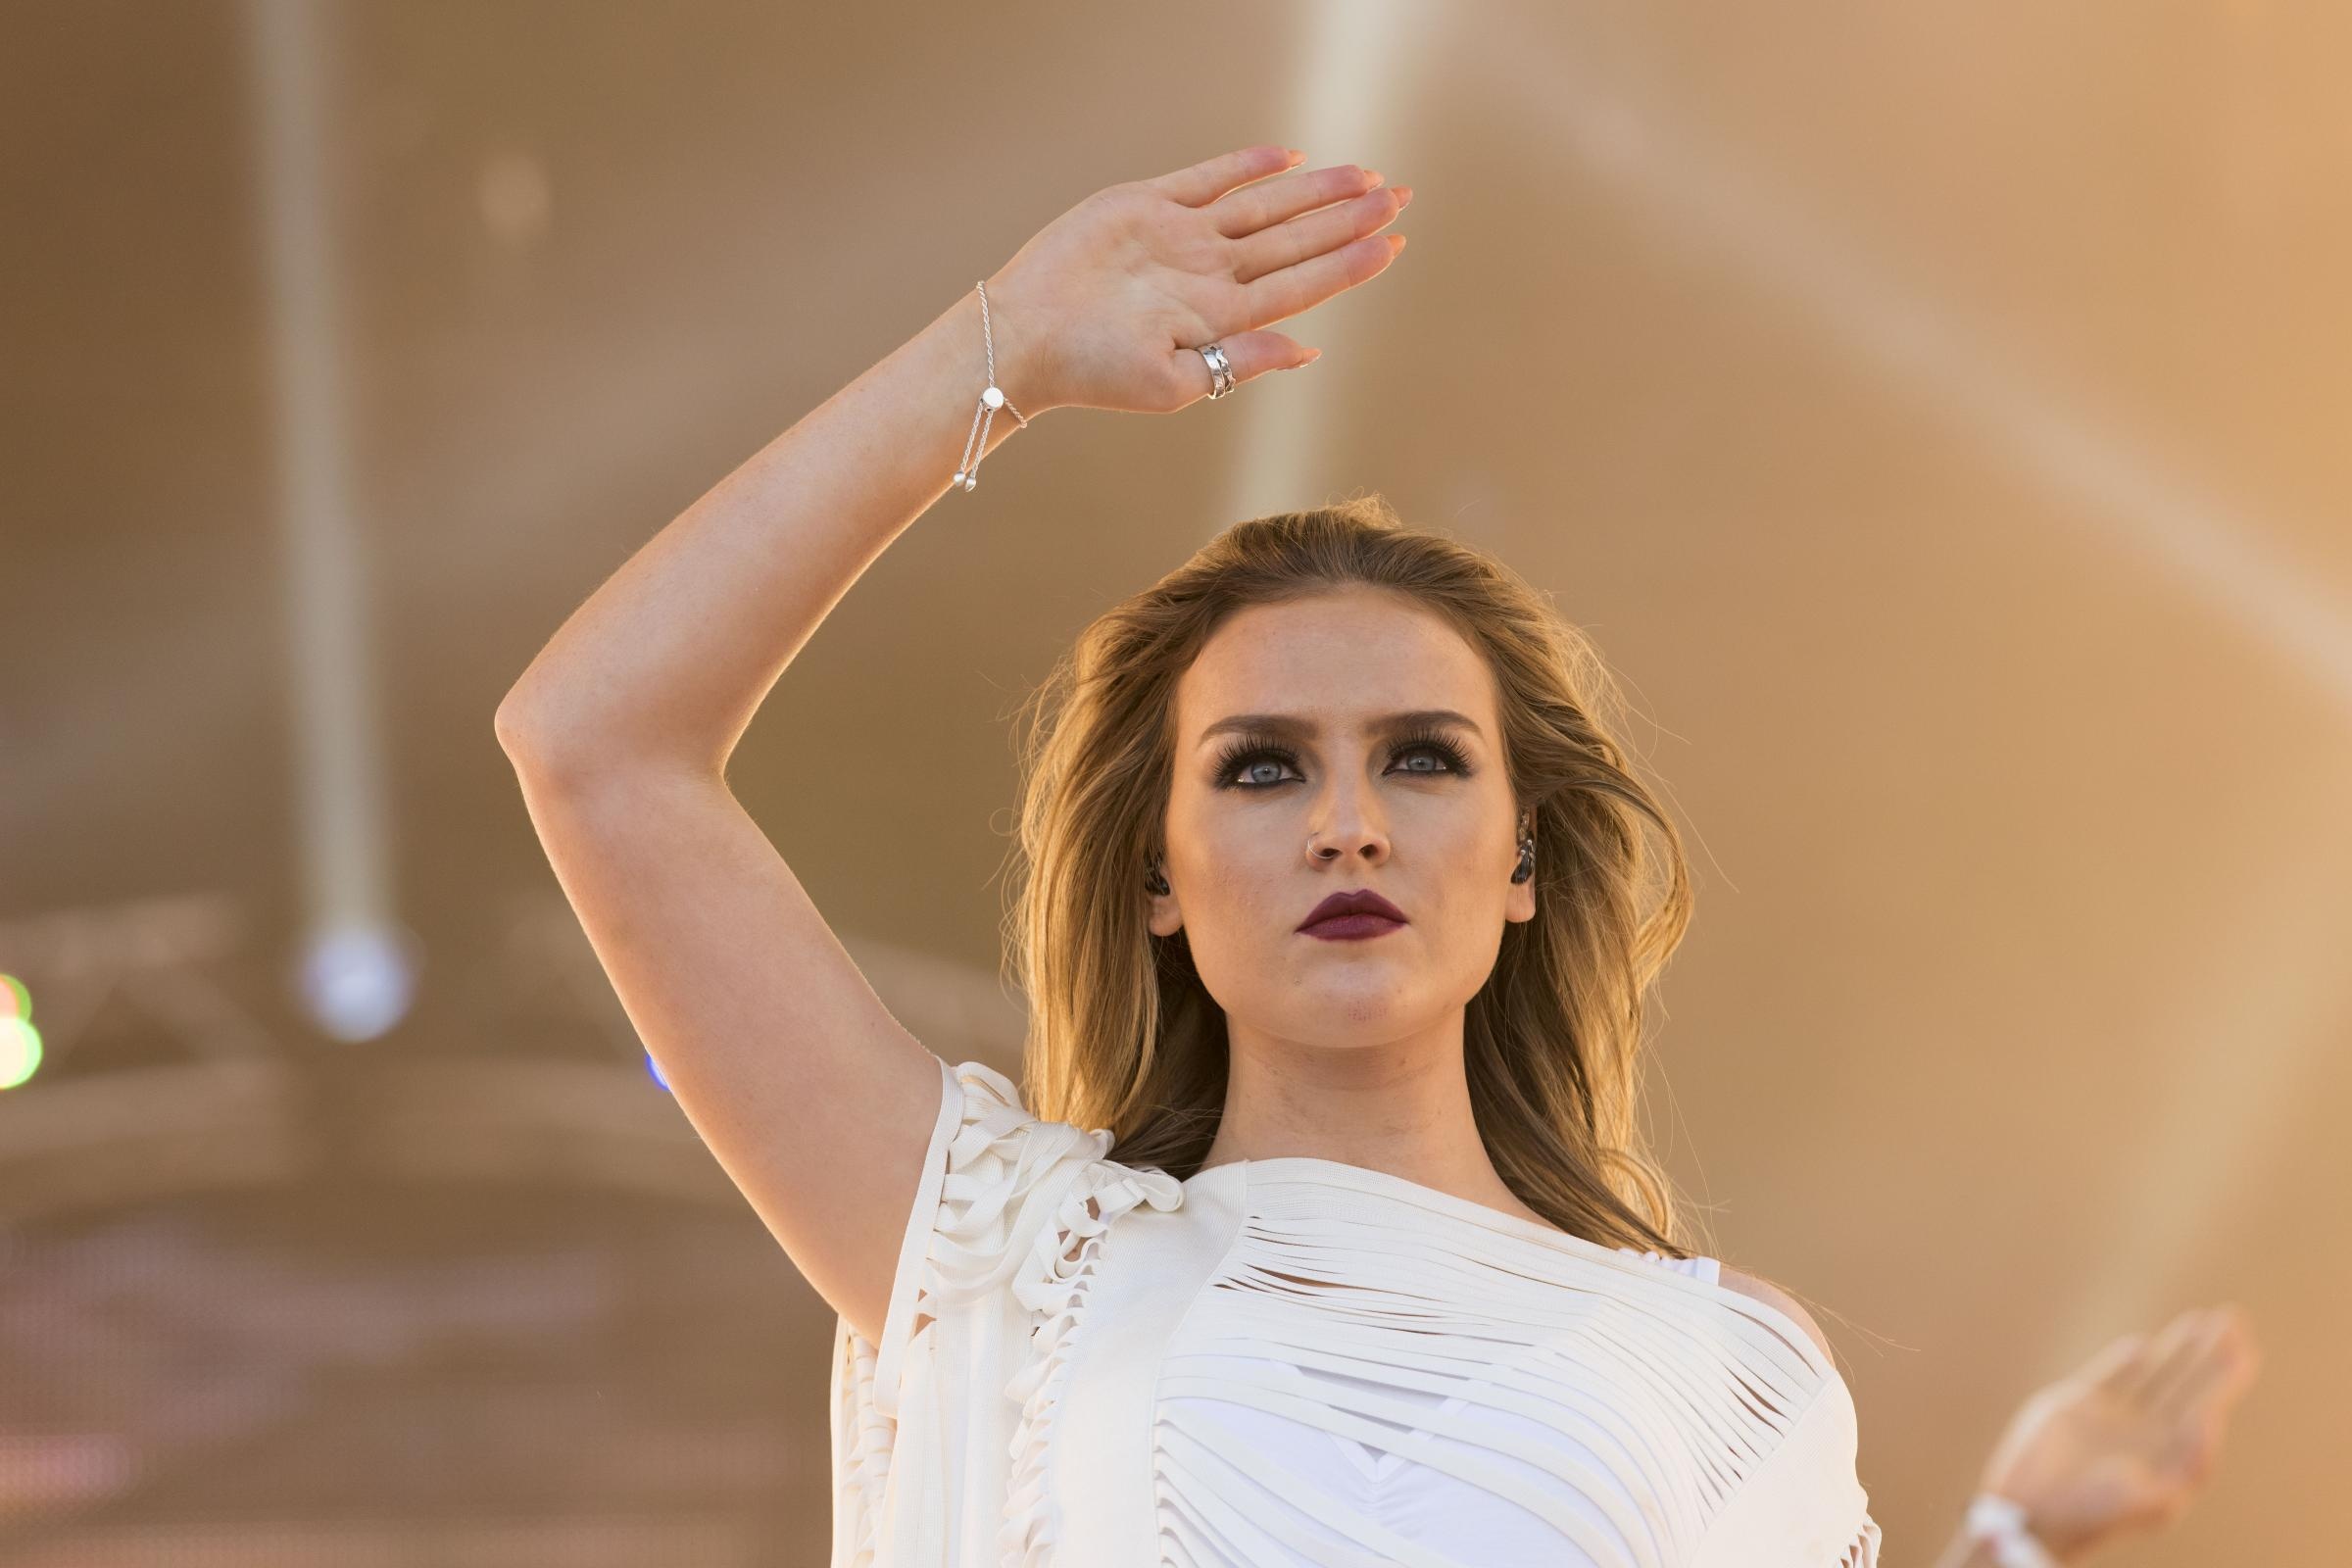 Perrie Edwards wallpapers, Top free, Backgrounds, Visual aesthetics, 2400x1600 HD Desktop